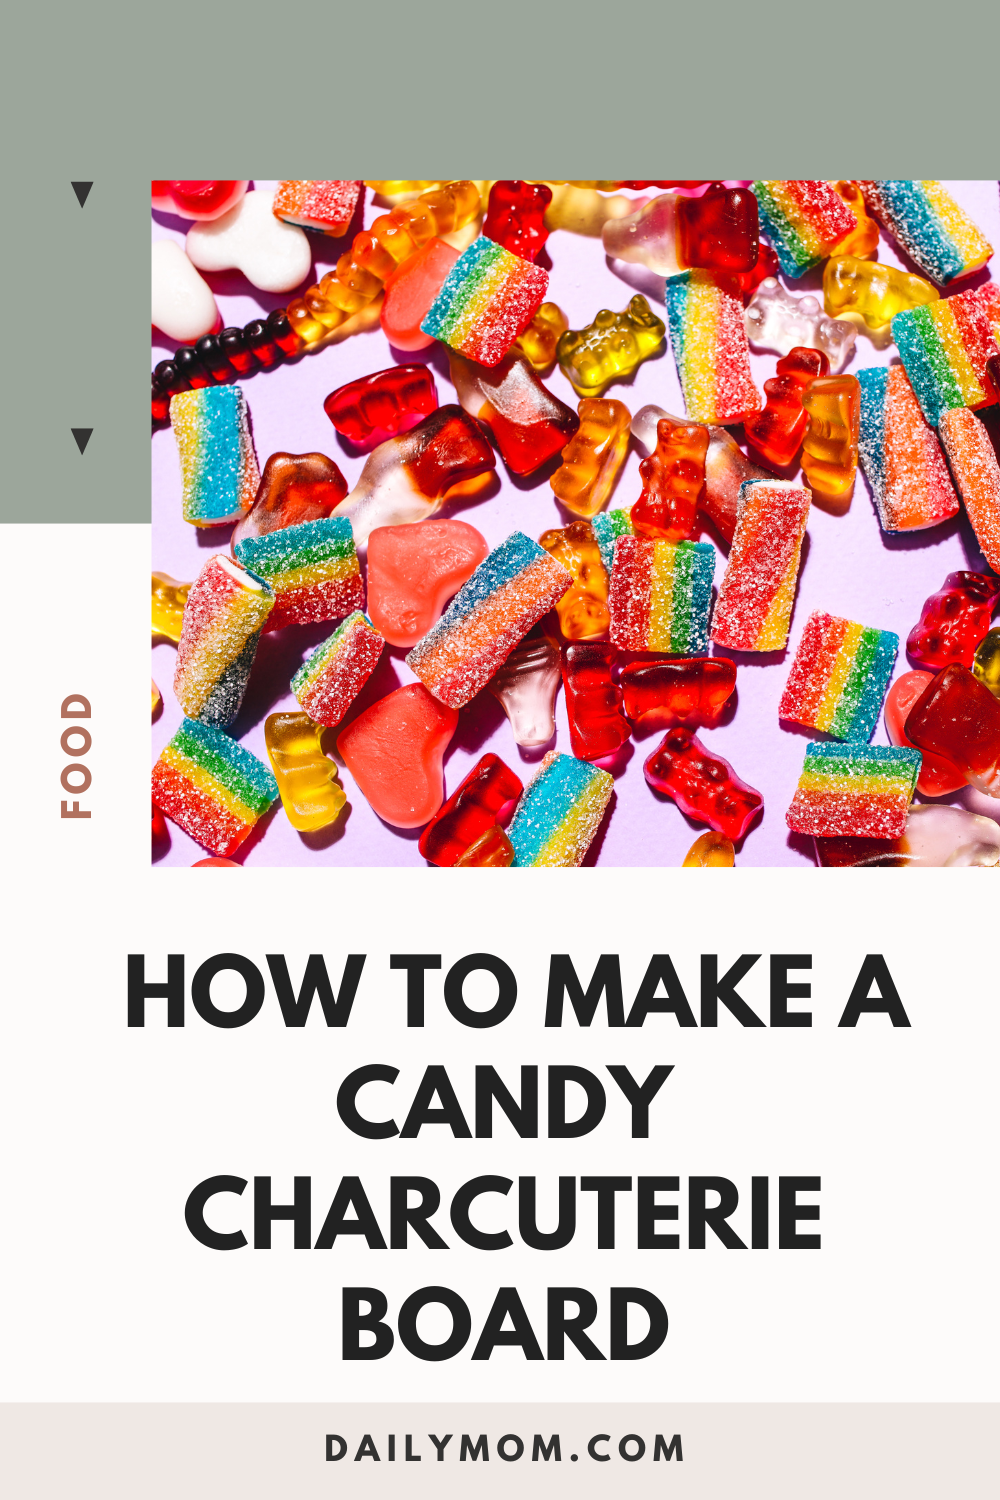 How To Make The Best Candy Charcuterie Board